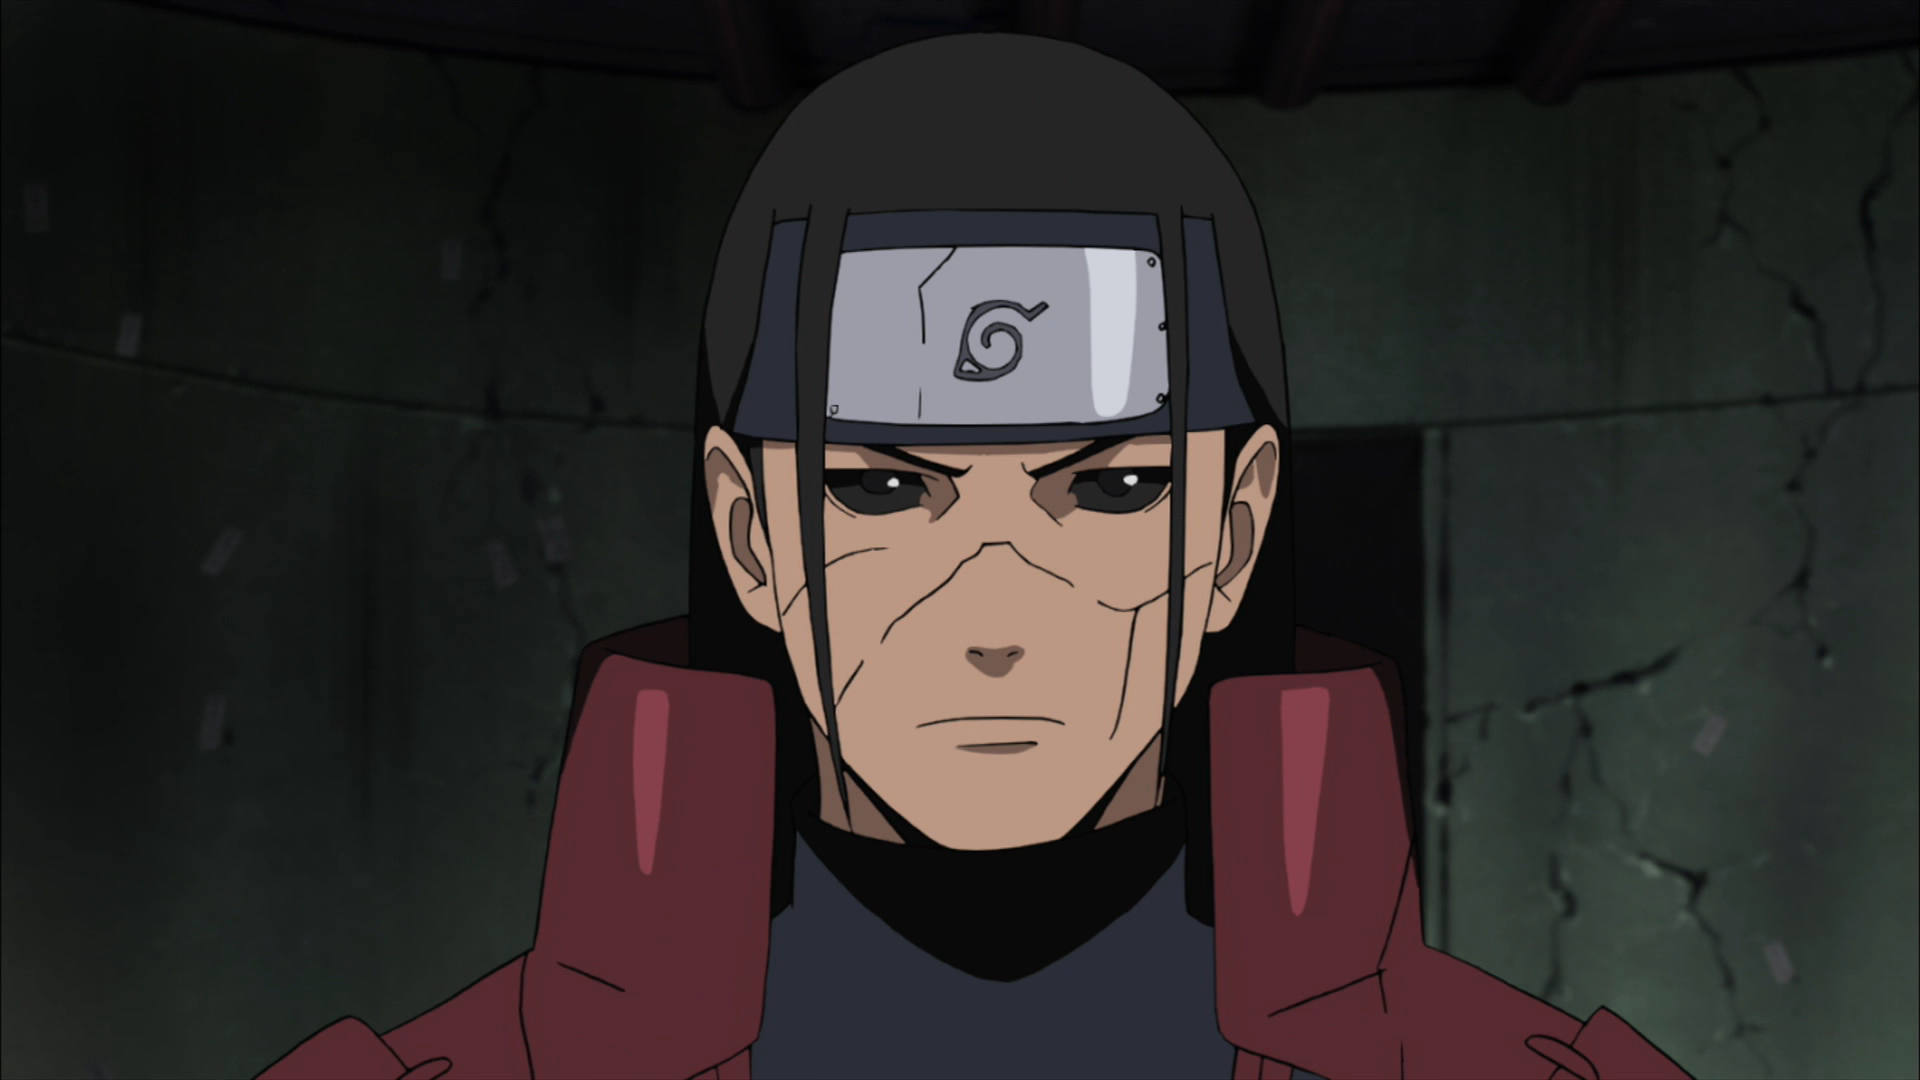 Can we take a moment to appreciate Hashirama Senju? He was the first hokage,  the strongest of all the kage, and his cells were used for pretty much  everything in the series.